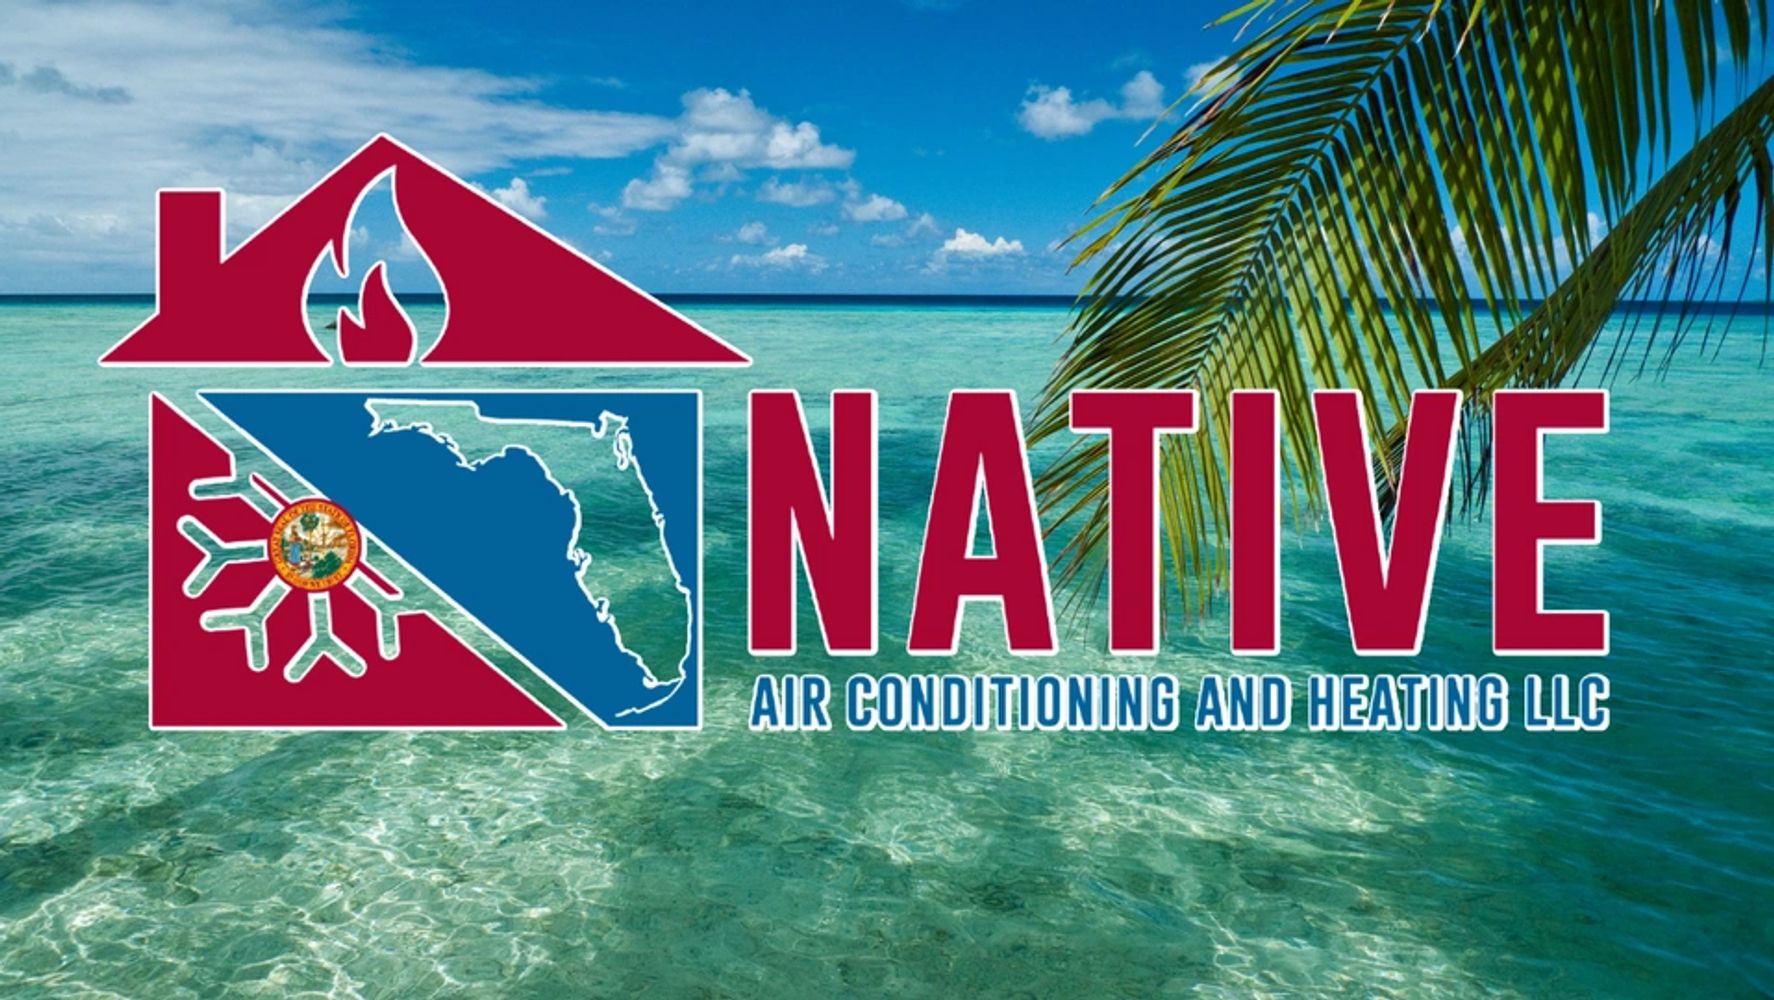 Native Air Conditioning and Heat, LLC
Port Charlotte Florida